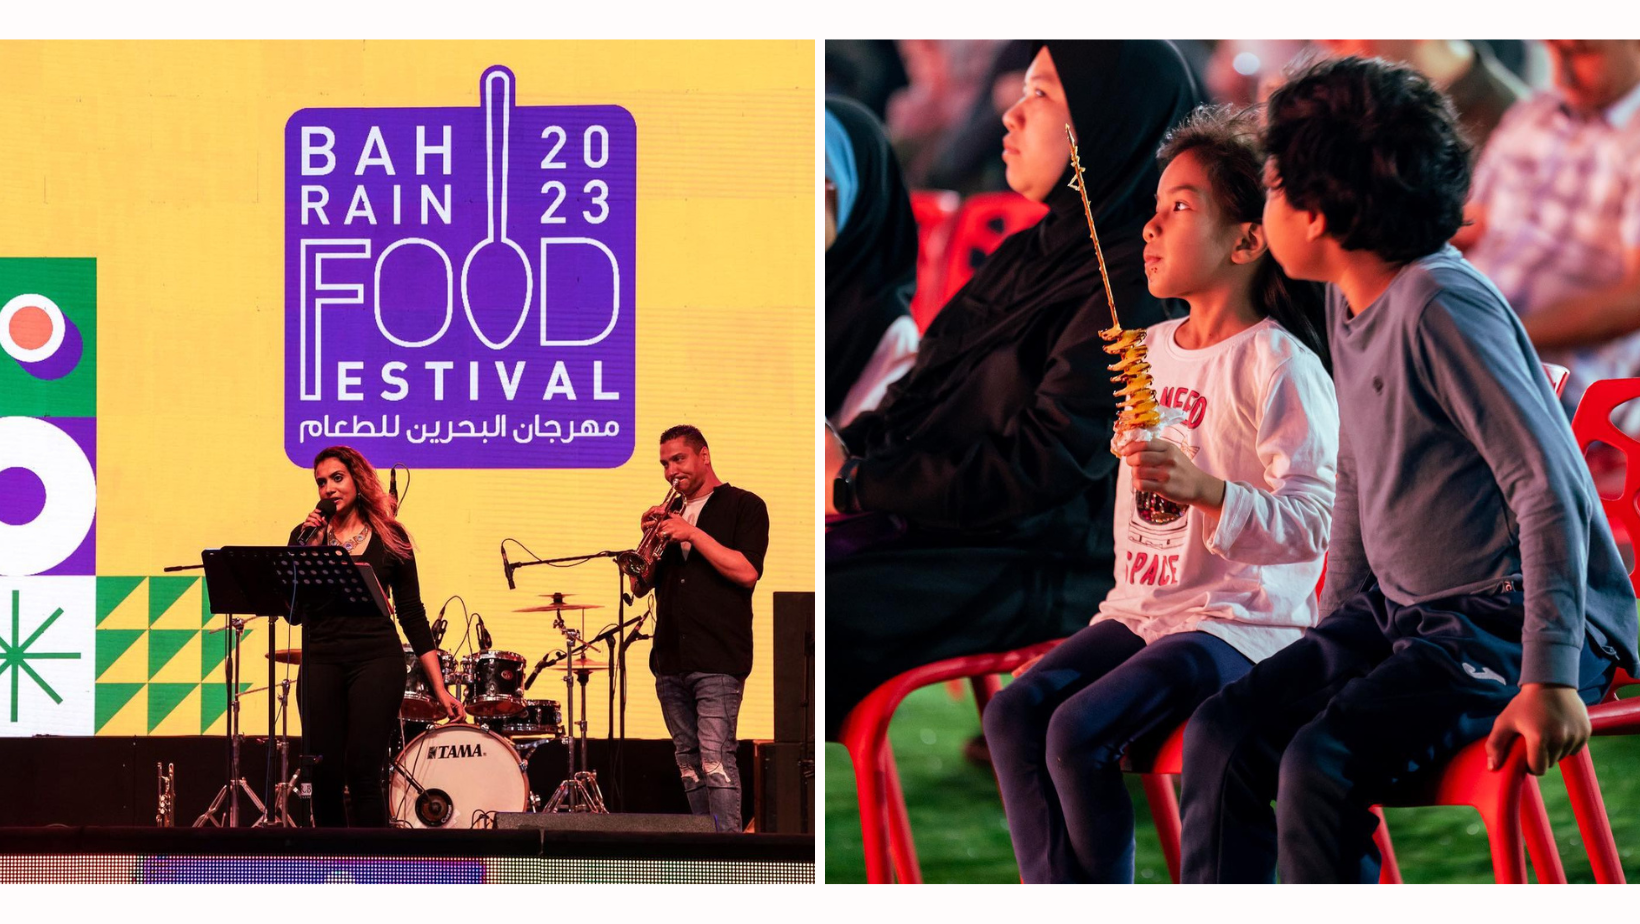 Bahrain Food Festival, culinary experiences, gastronomic journey, tourism beauty, foodies, local and international restaurants, exceptional experience, localbh